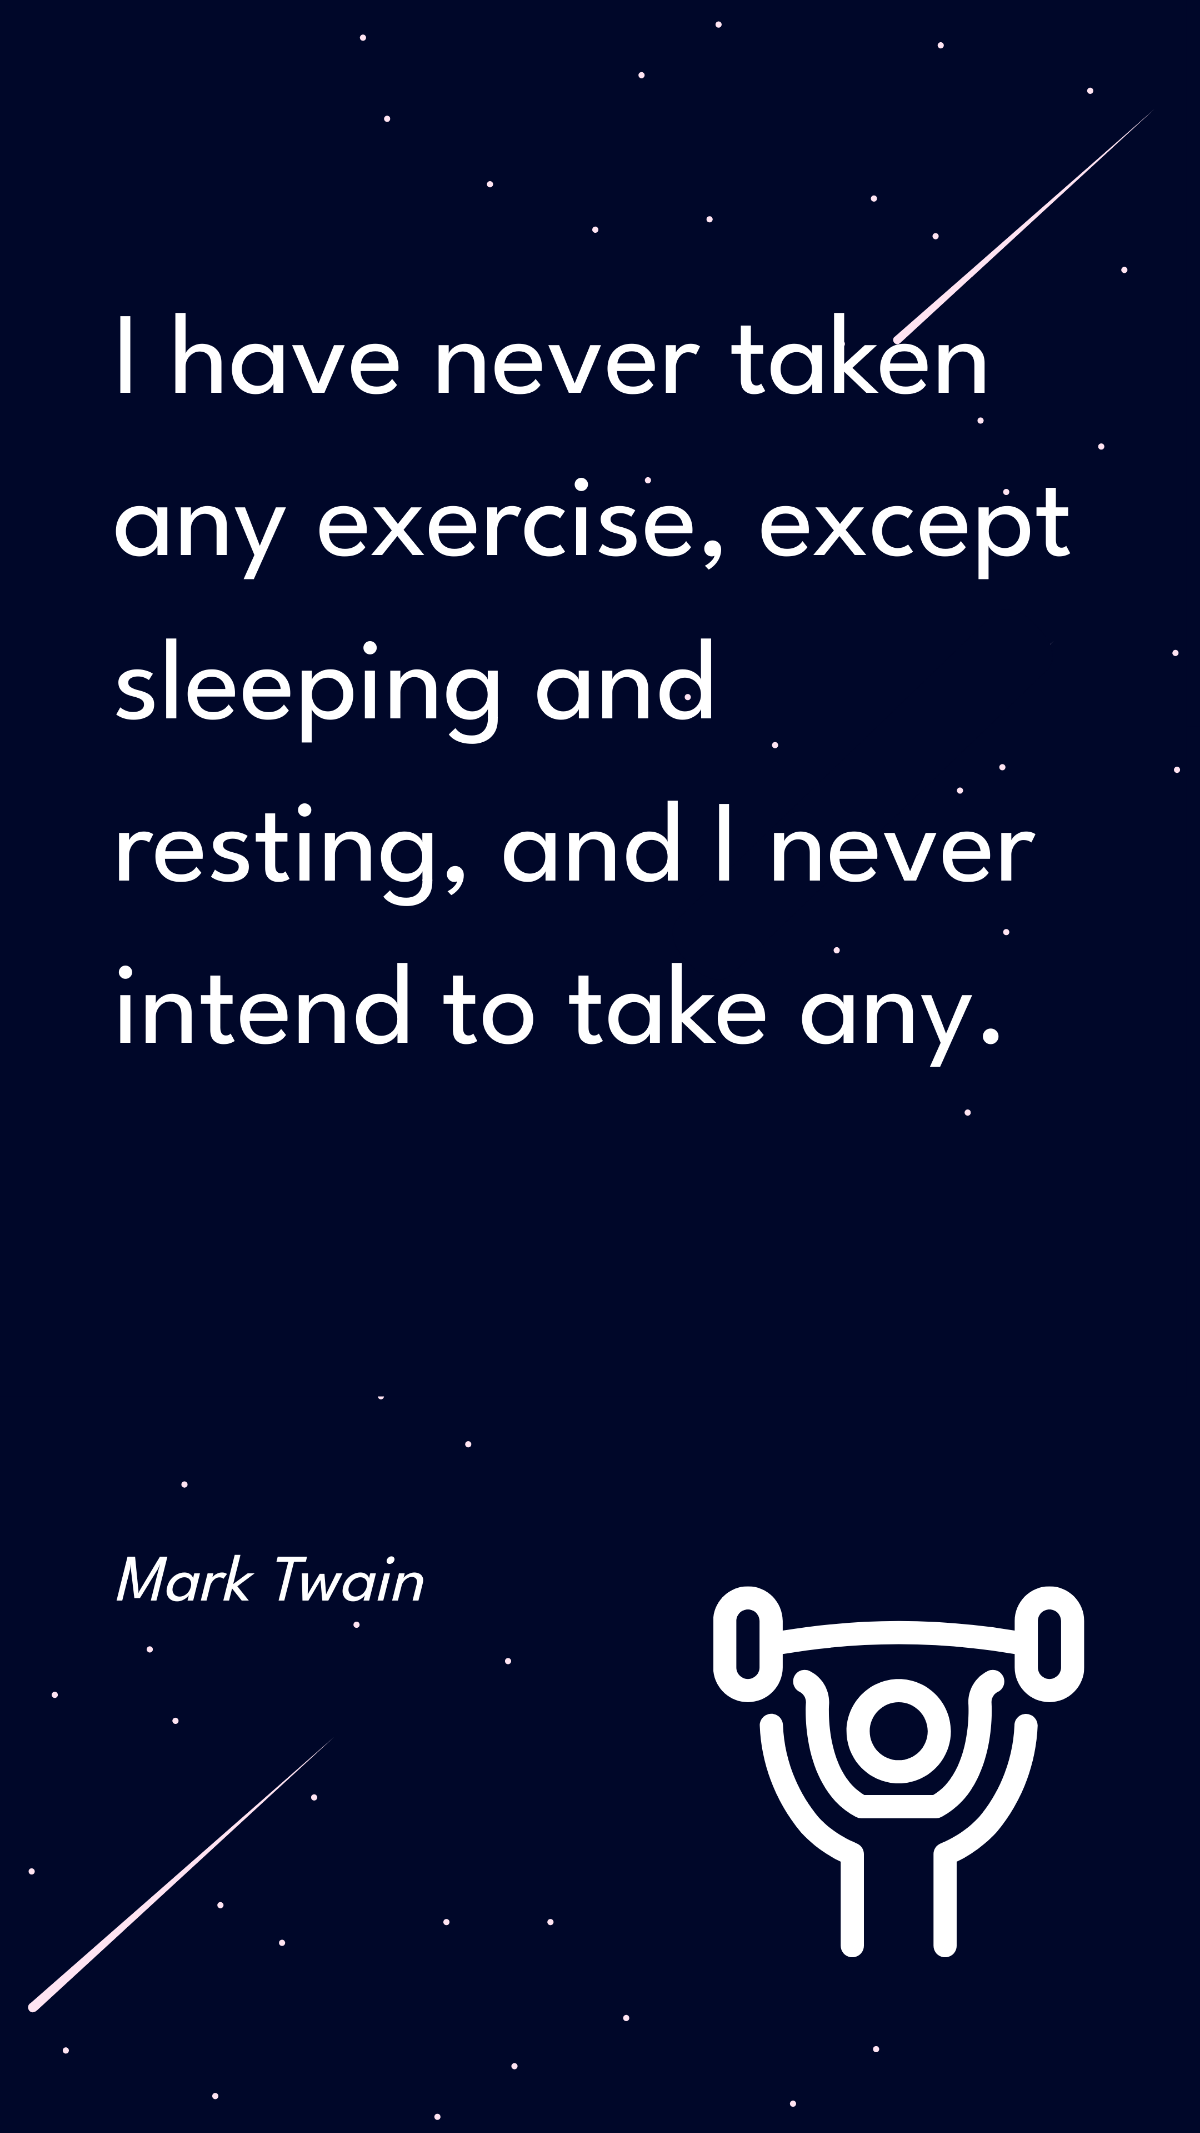 Mark Twain - I have never taken any exercise, except sleeping and resting, and I never intend to take any.